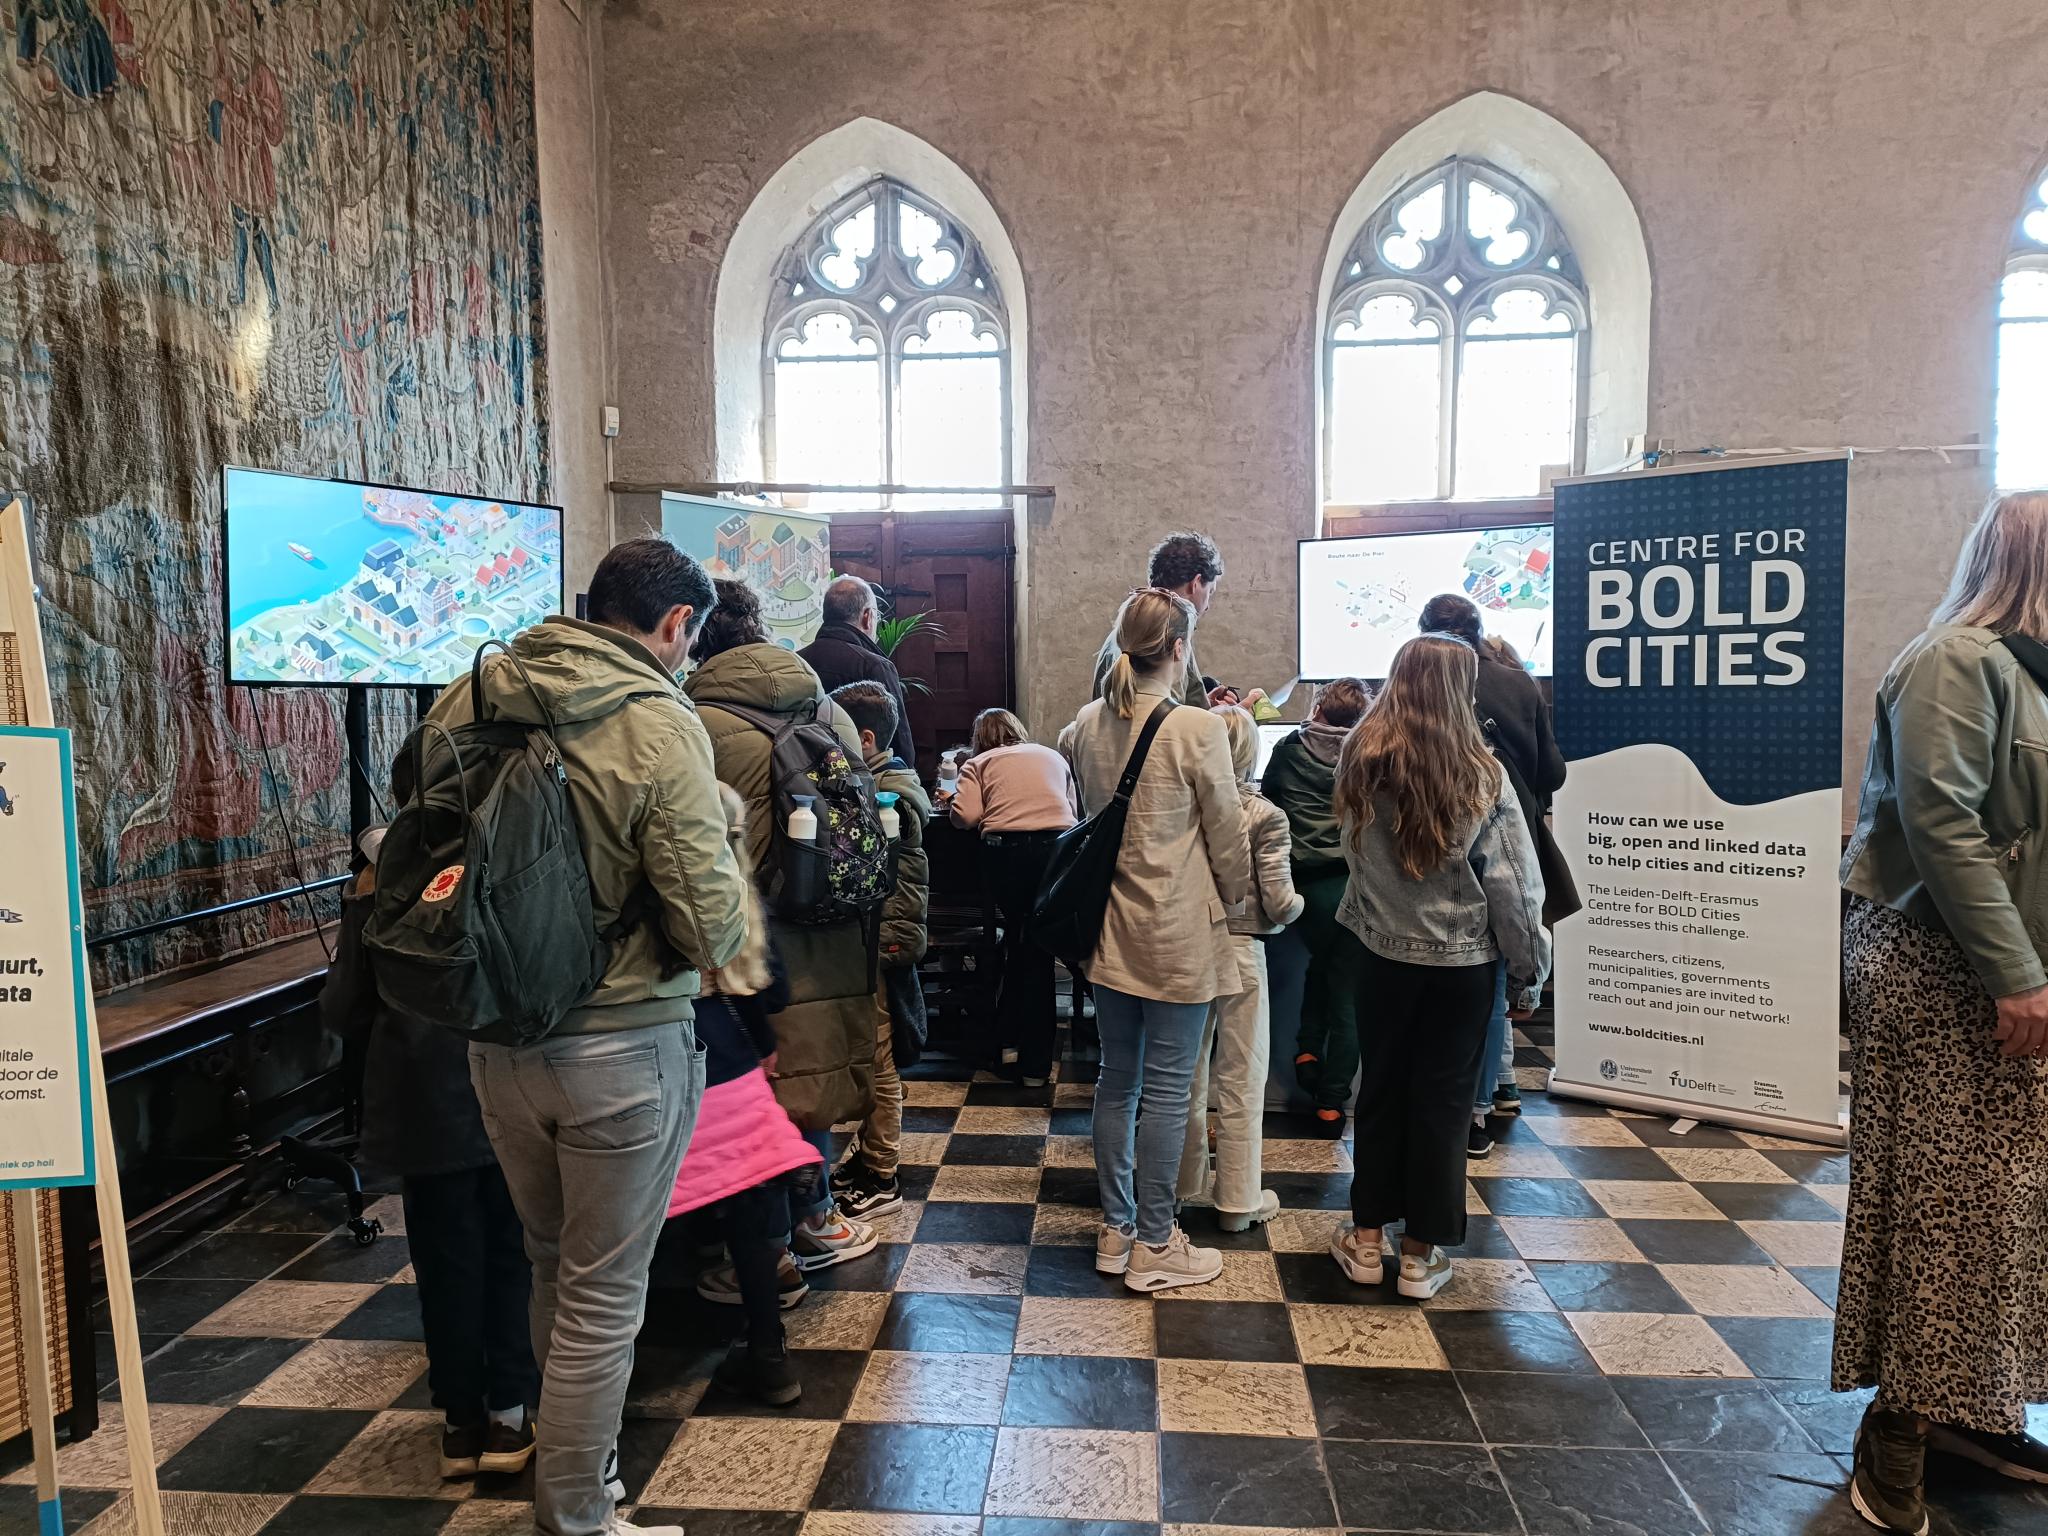 At Expeditie NEXT. Childrens and their parents in front of screens and banner with name: Centre for BOLD Cities